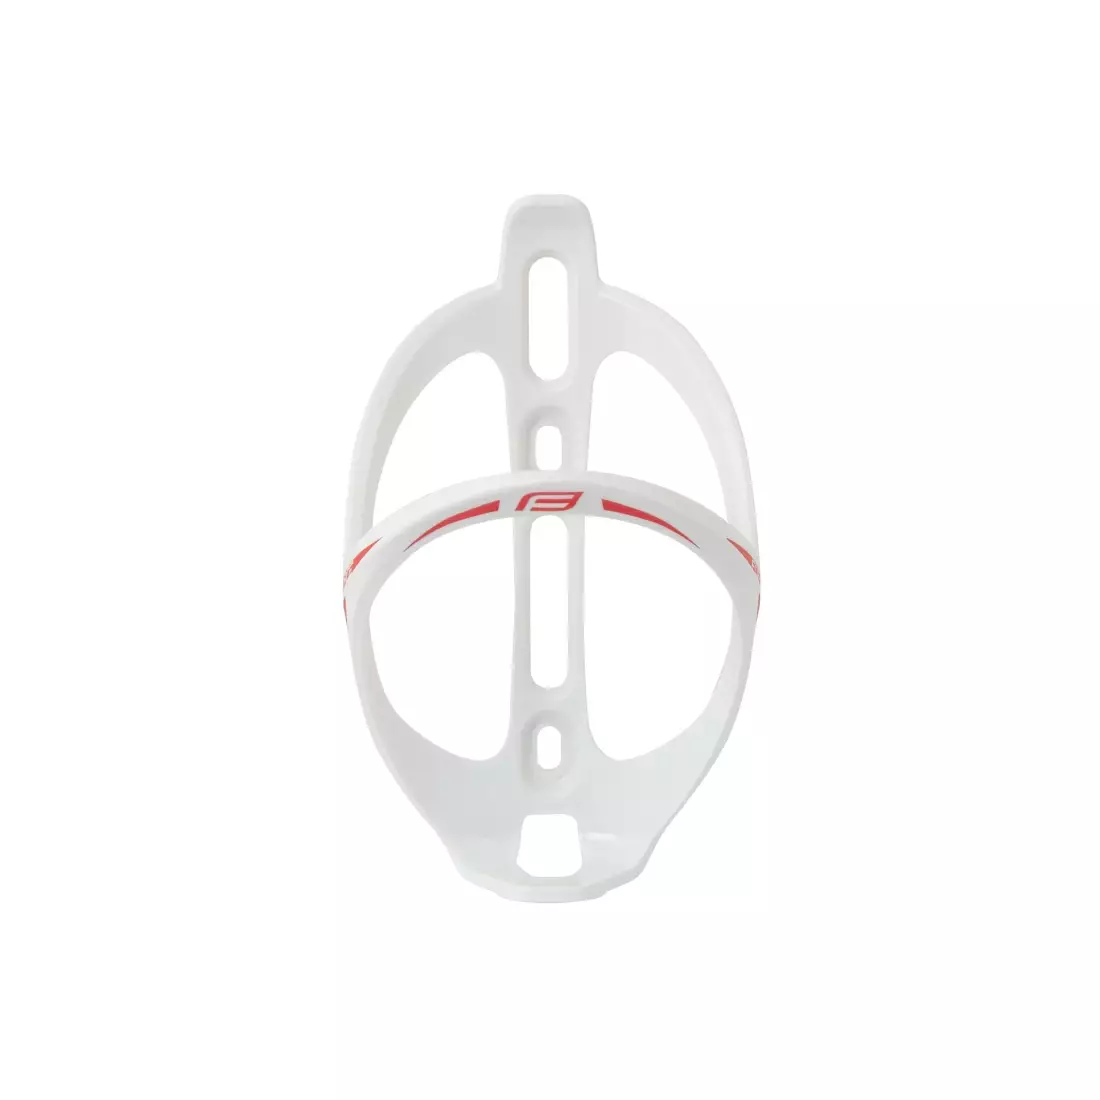 FORCE GET Water bottle cage white and red 241295